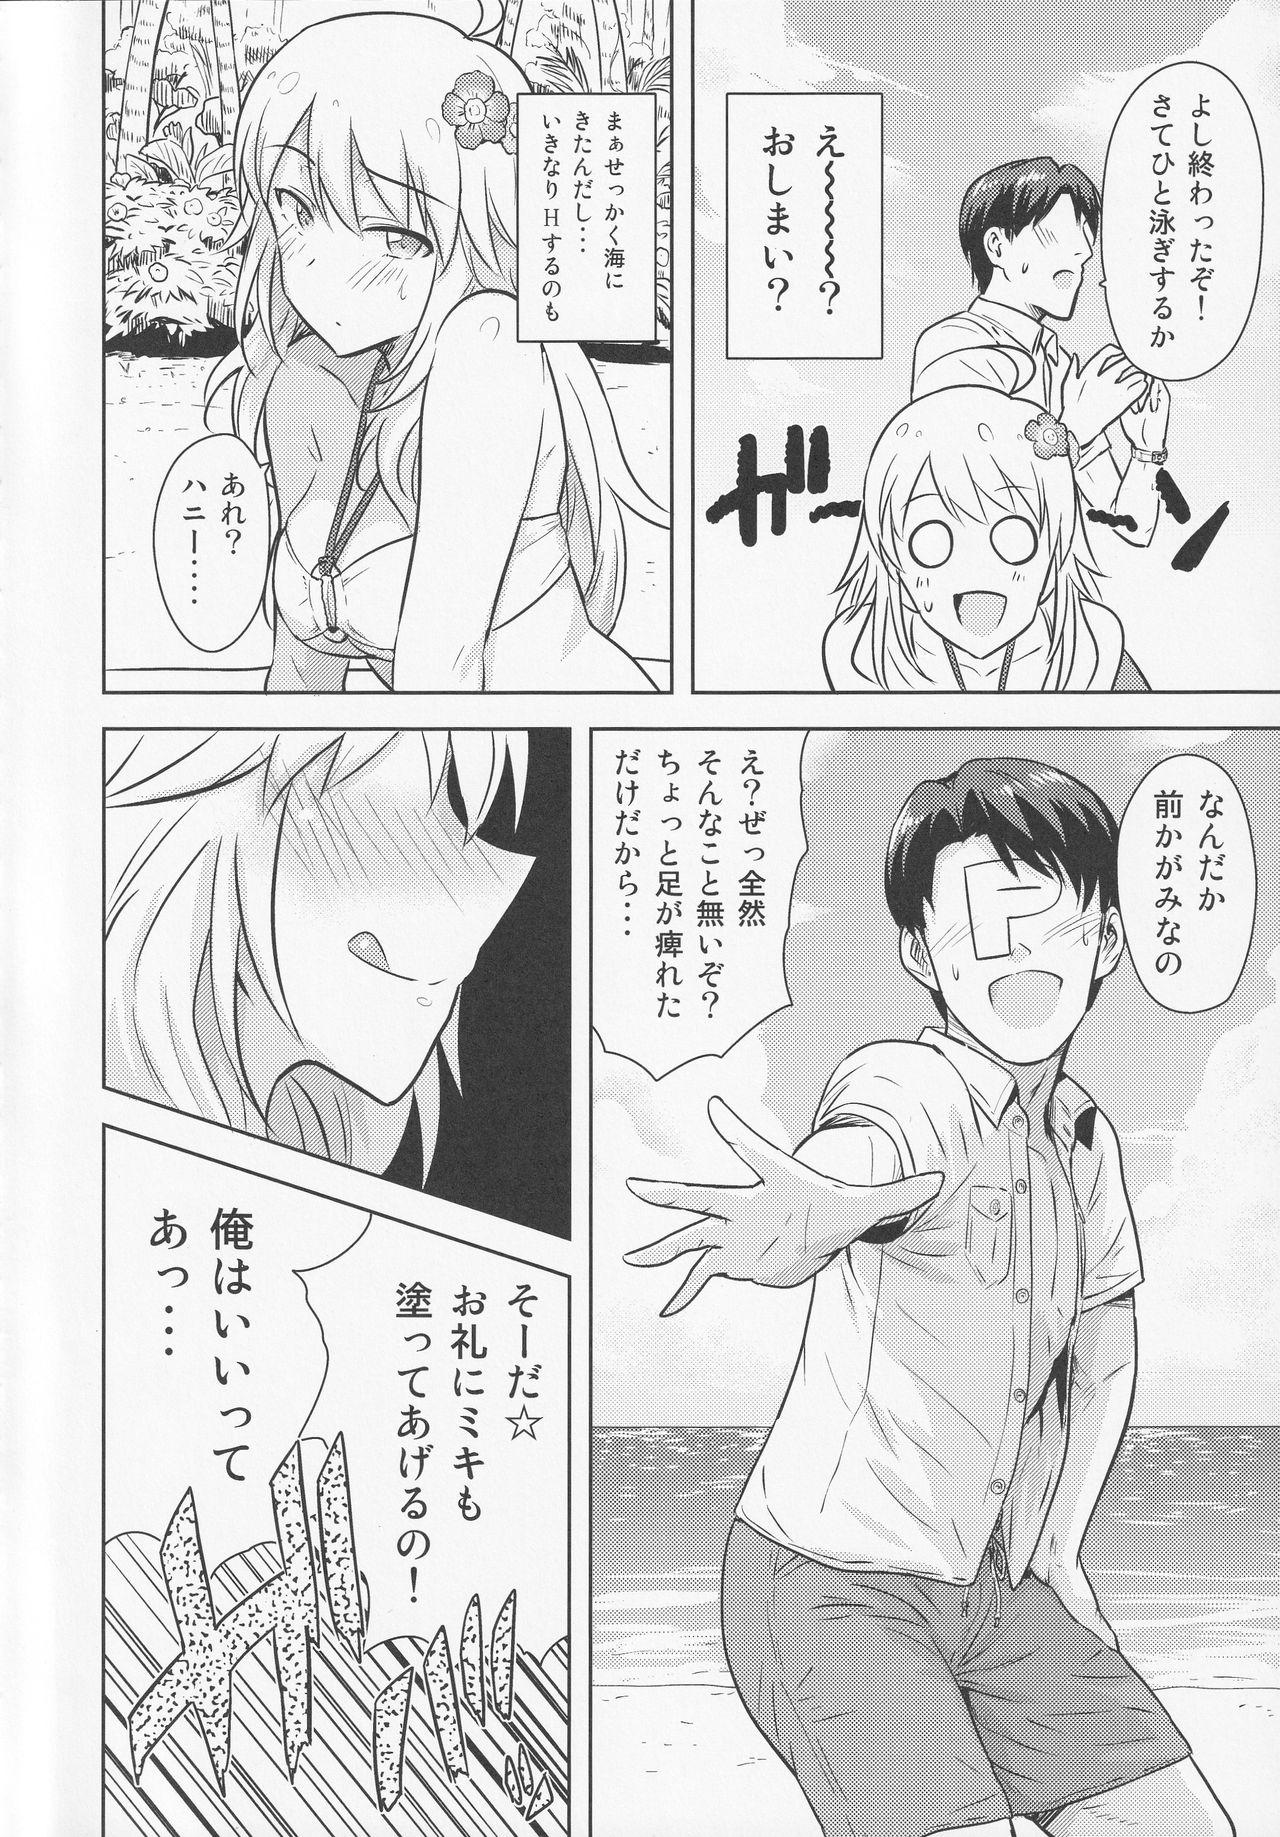 Chacal Oshiete MY HONEY 2 Zenpen - The idolmaster Collar - Page 7